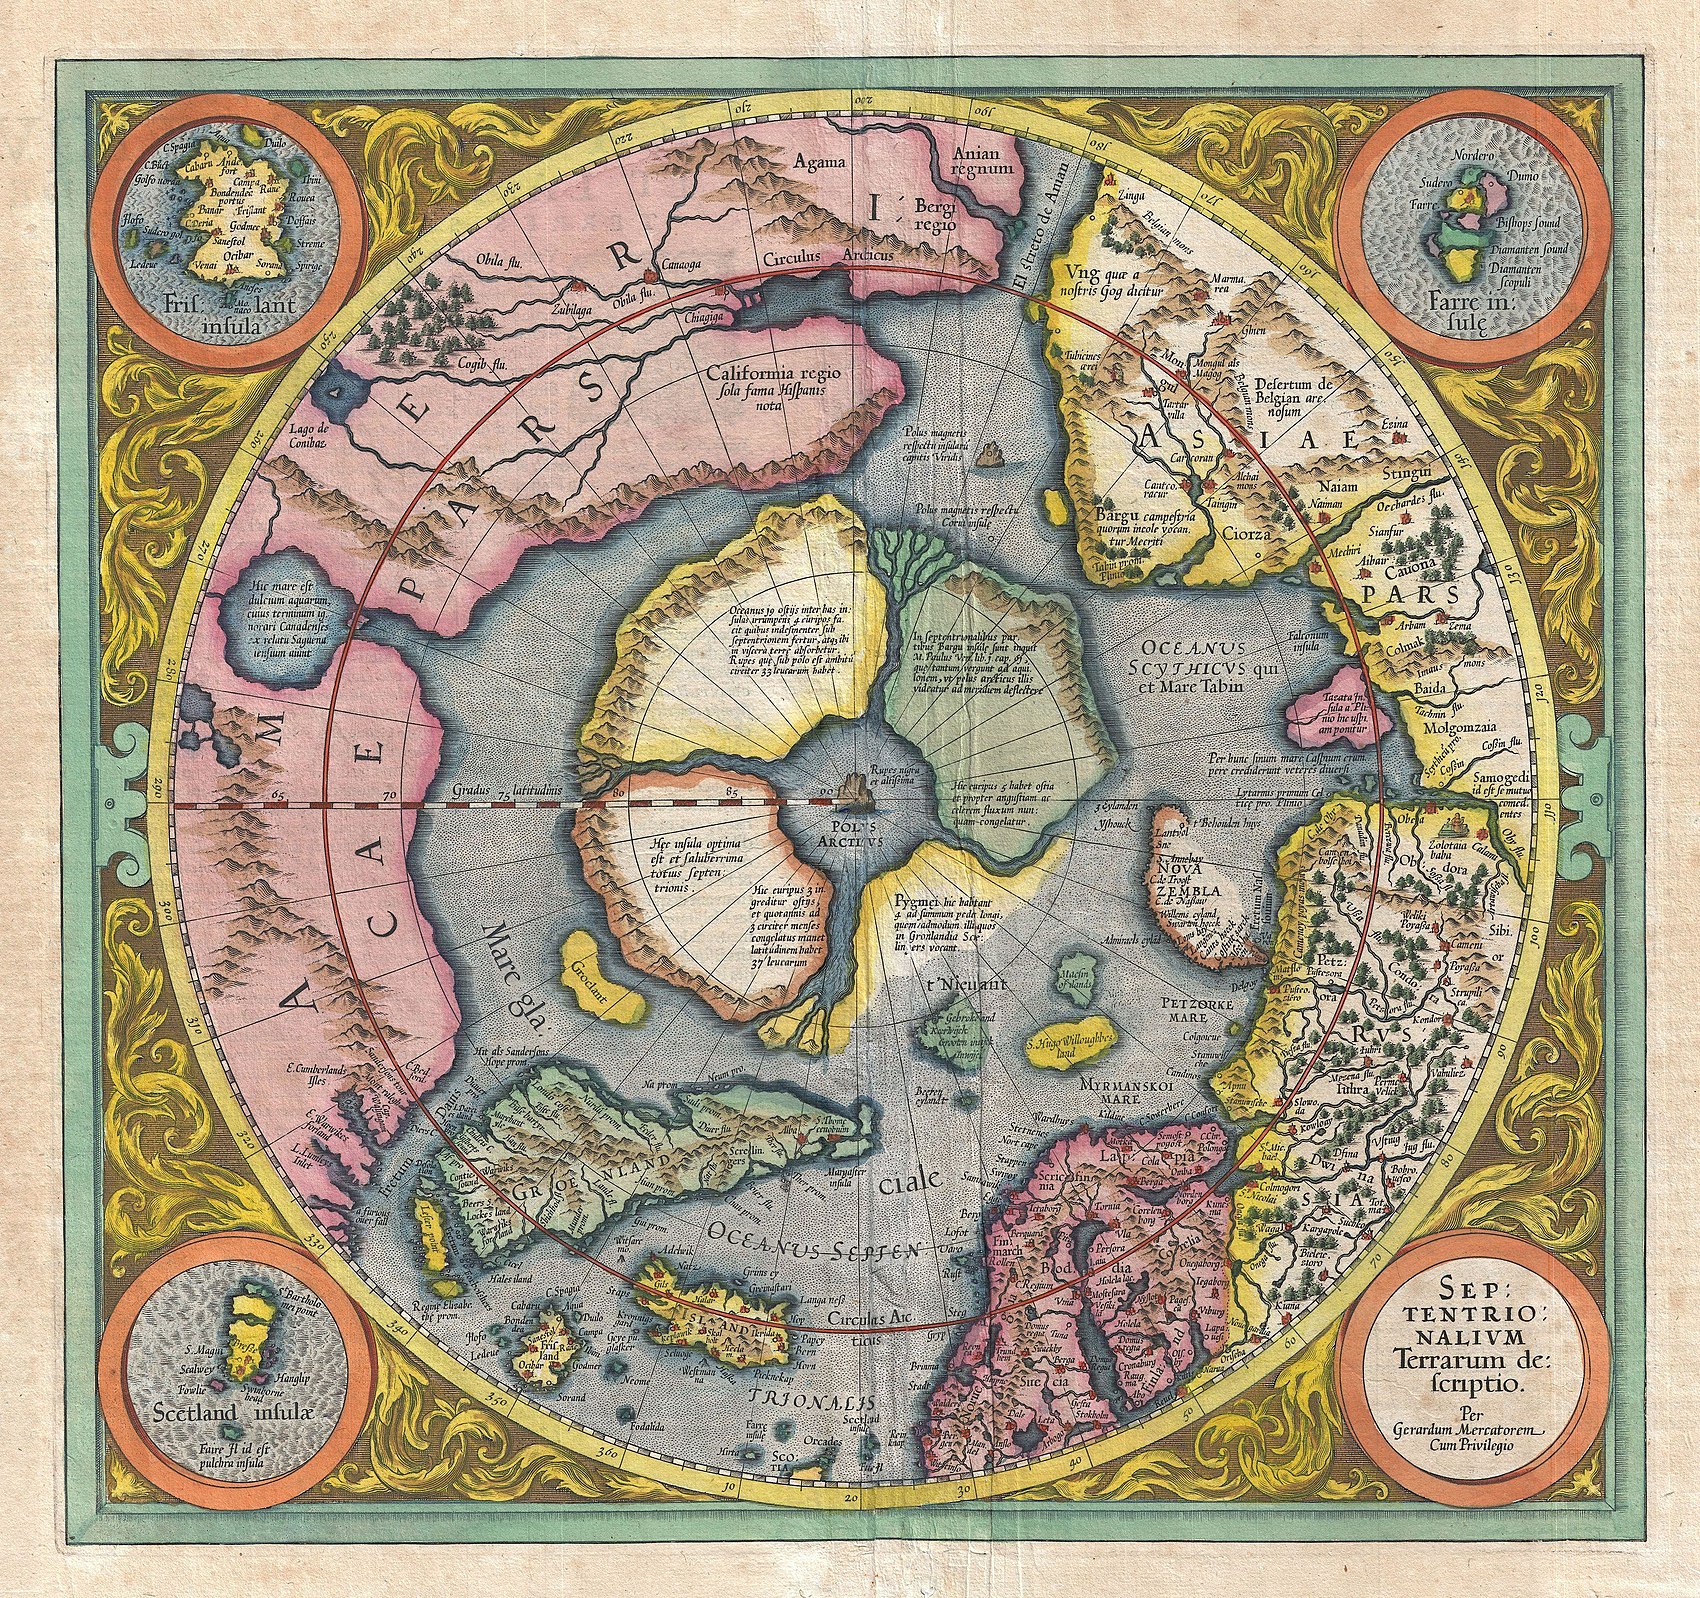 1606 Mercator Hondius Map of the Arctic (First Map of the North Pole) - Geographicus - NorthPole-mercator-1606.jpg